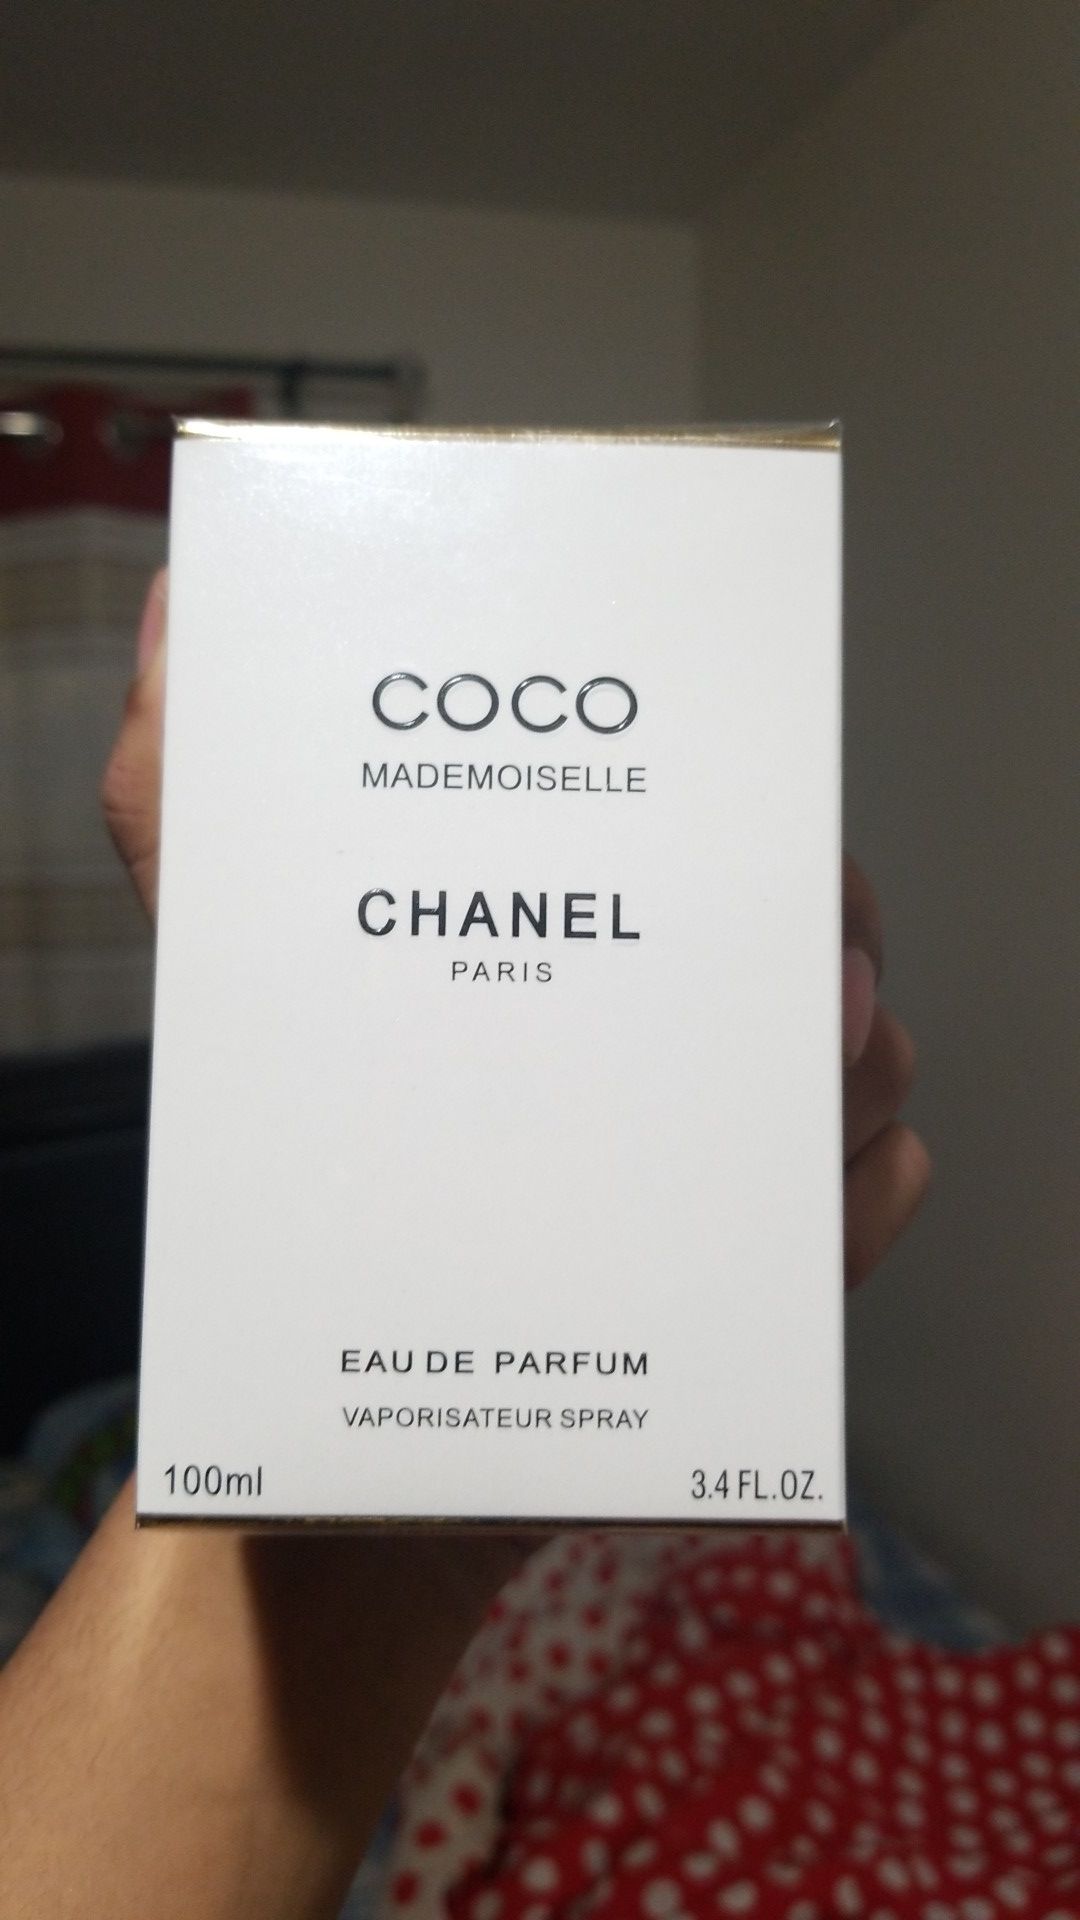 Coco Mademoiselle chanel